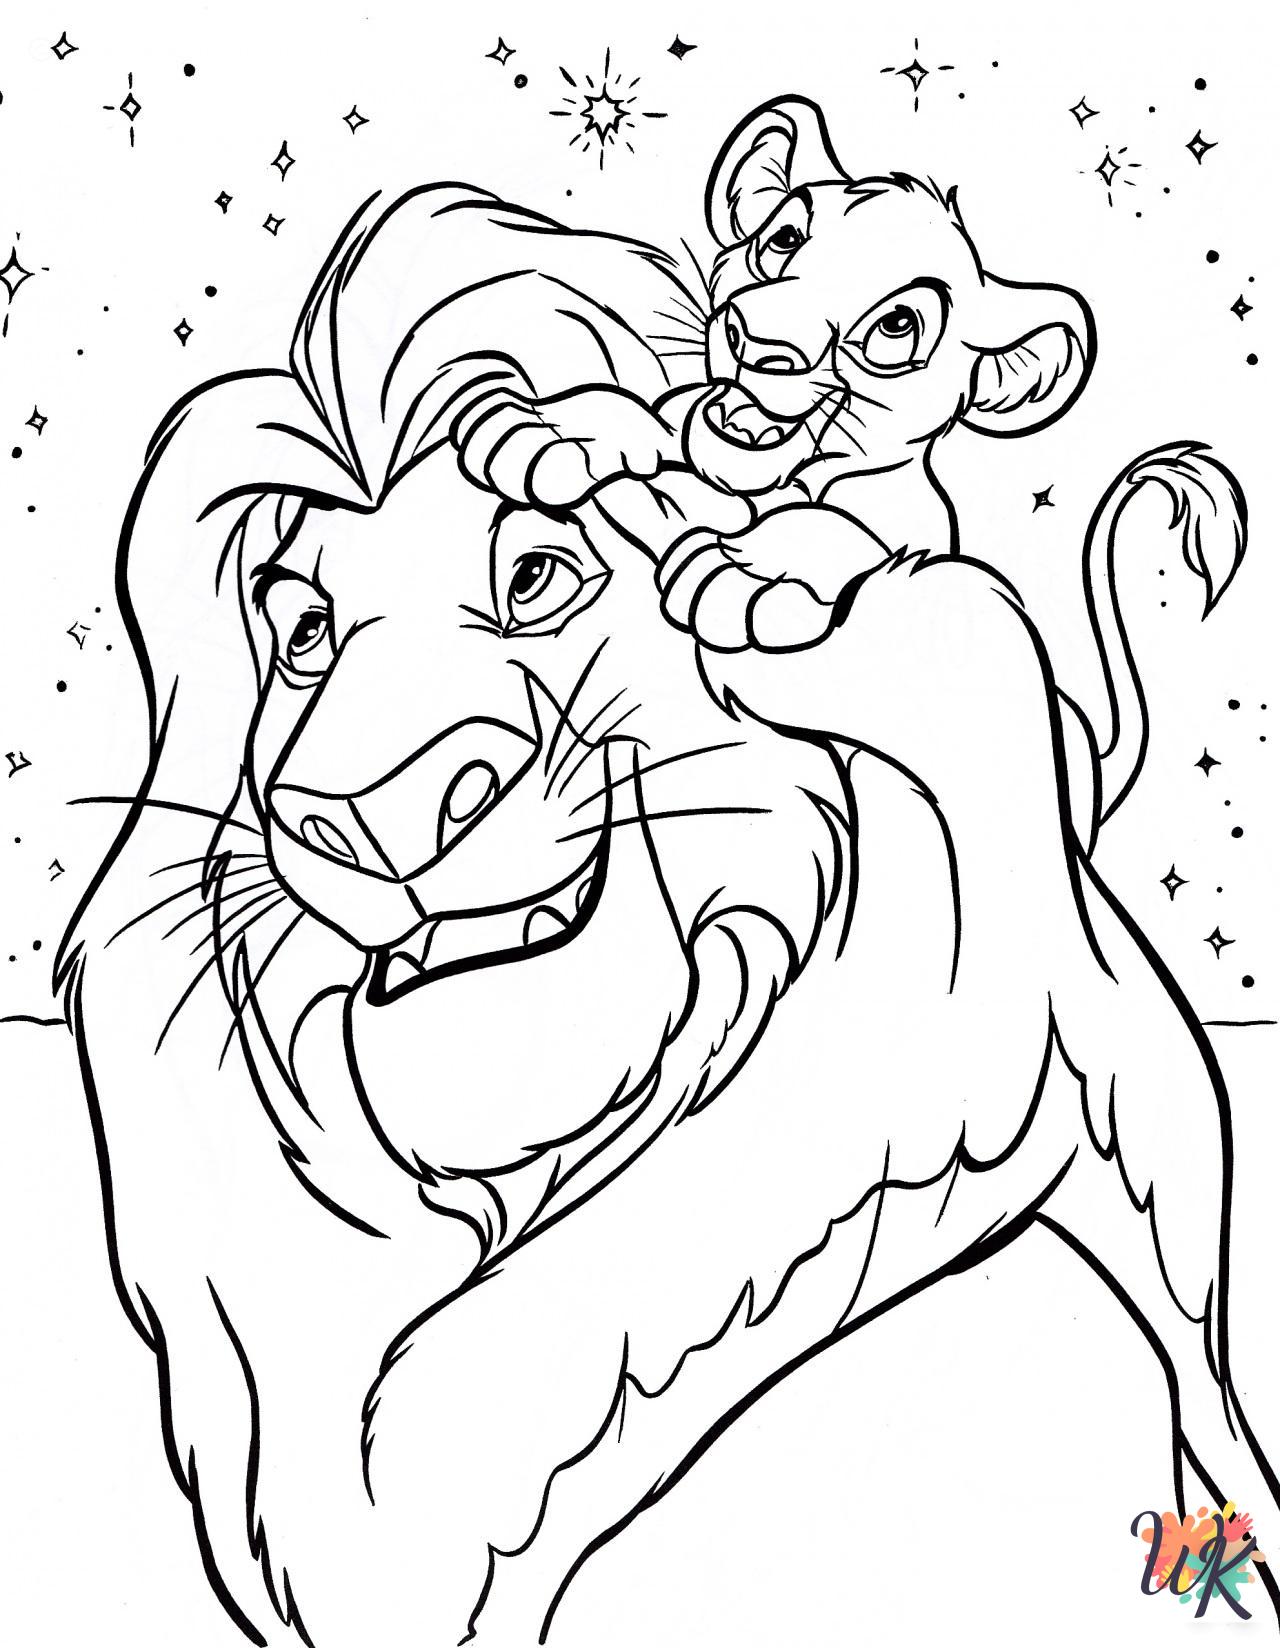 Lion King coloring pages for kids